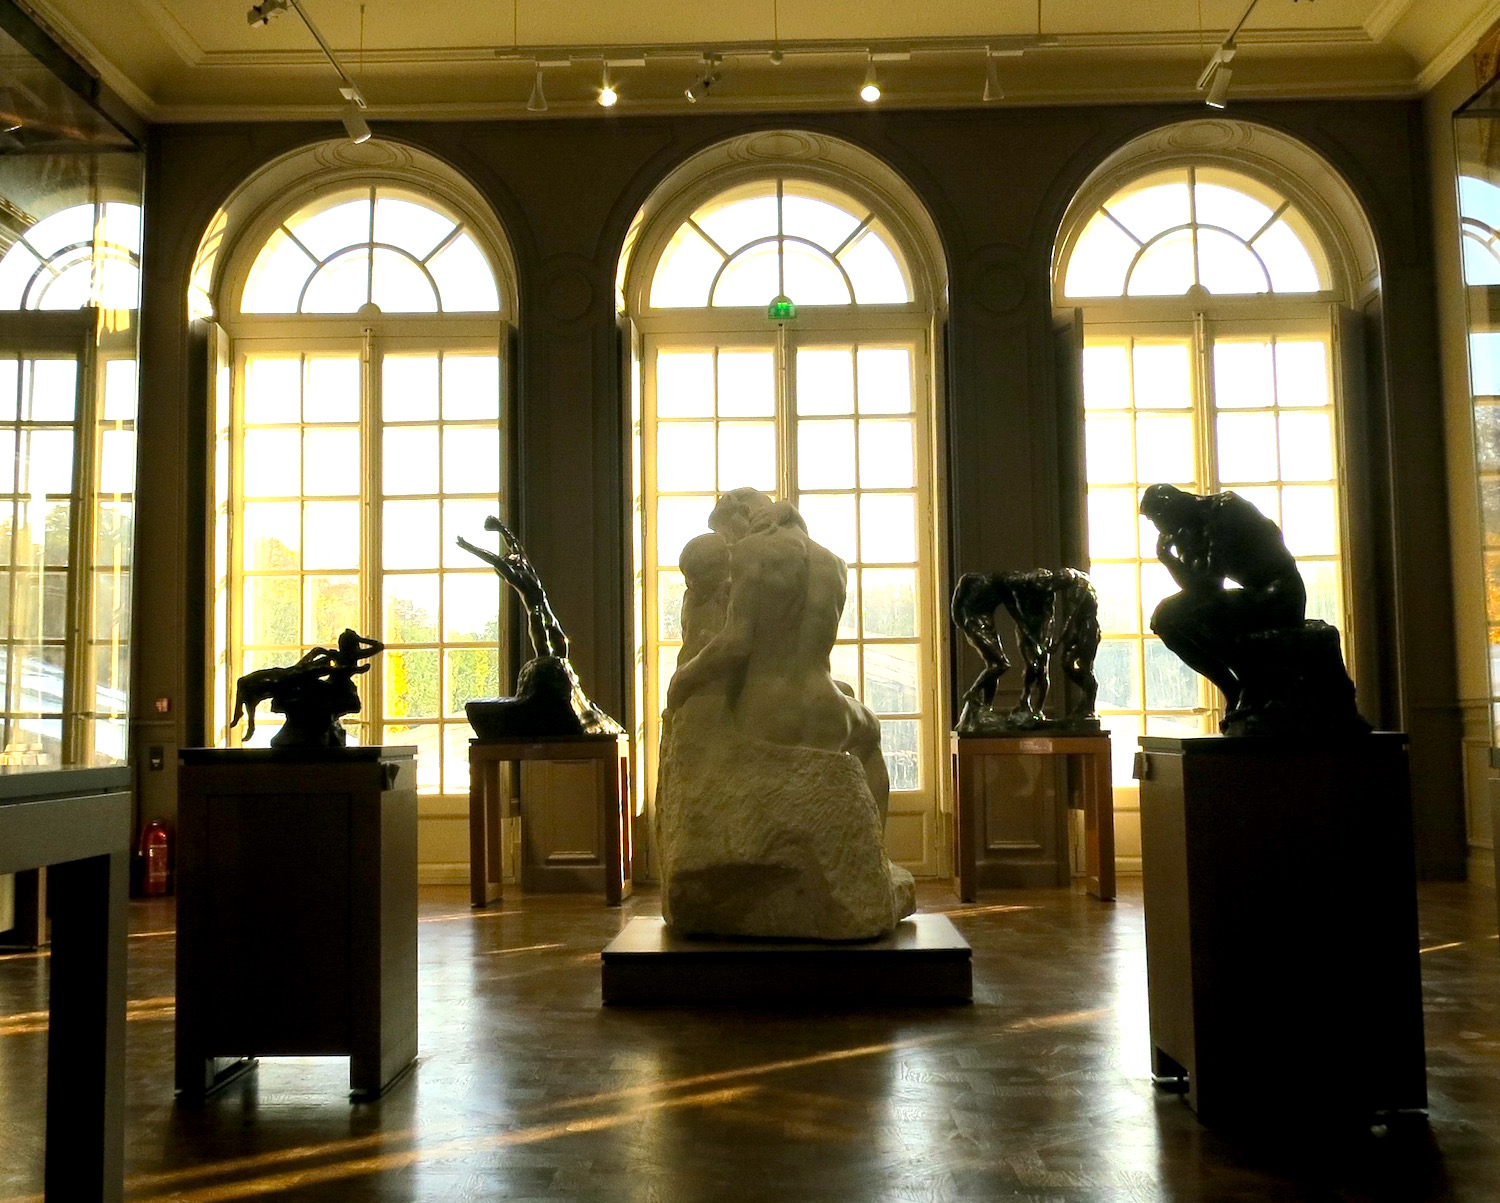 Rodin's most emblematic works: The Kiss, The Thinker, The Three Shadows ©Sylvia Davis